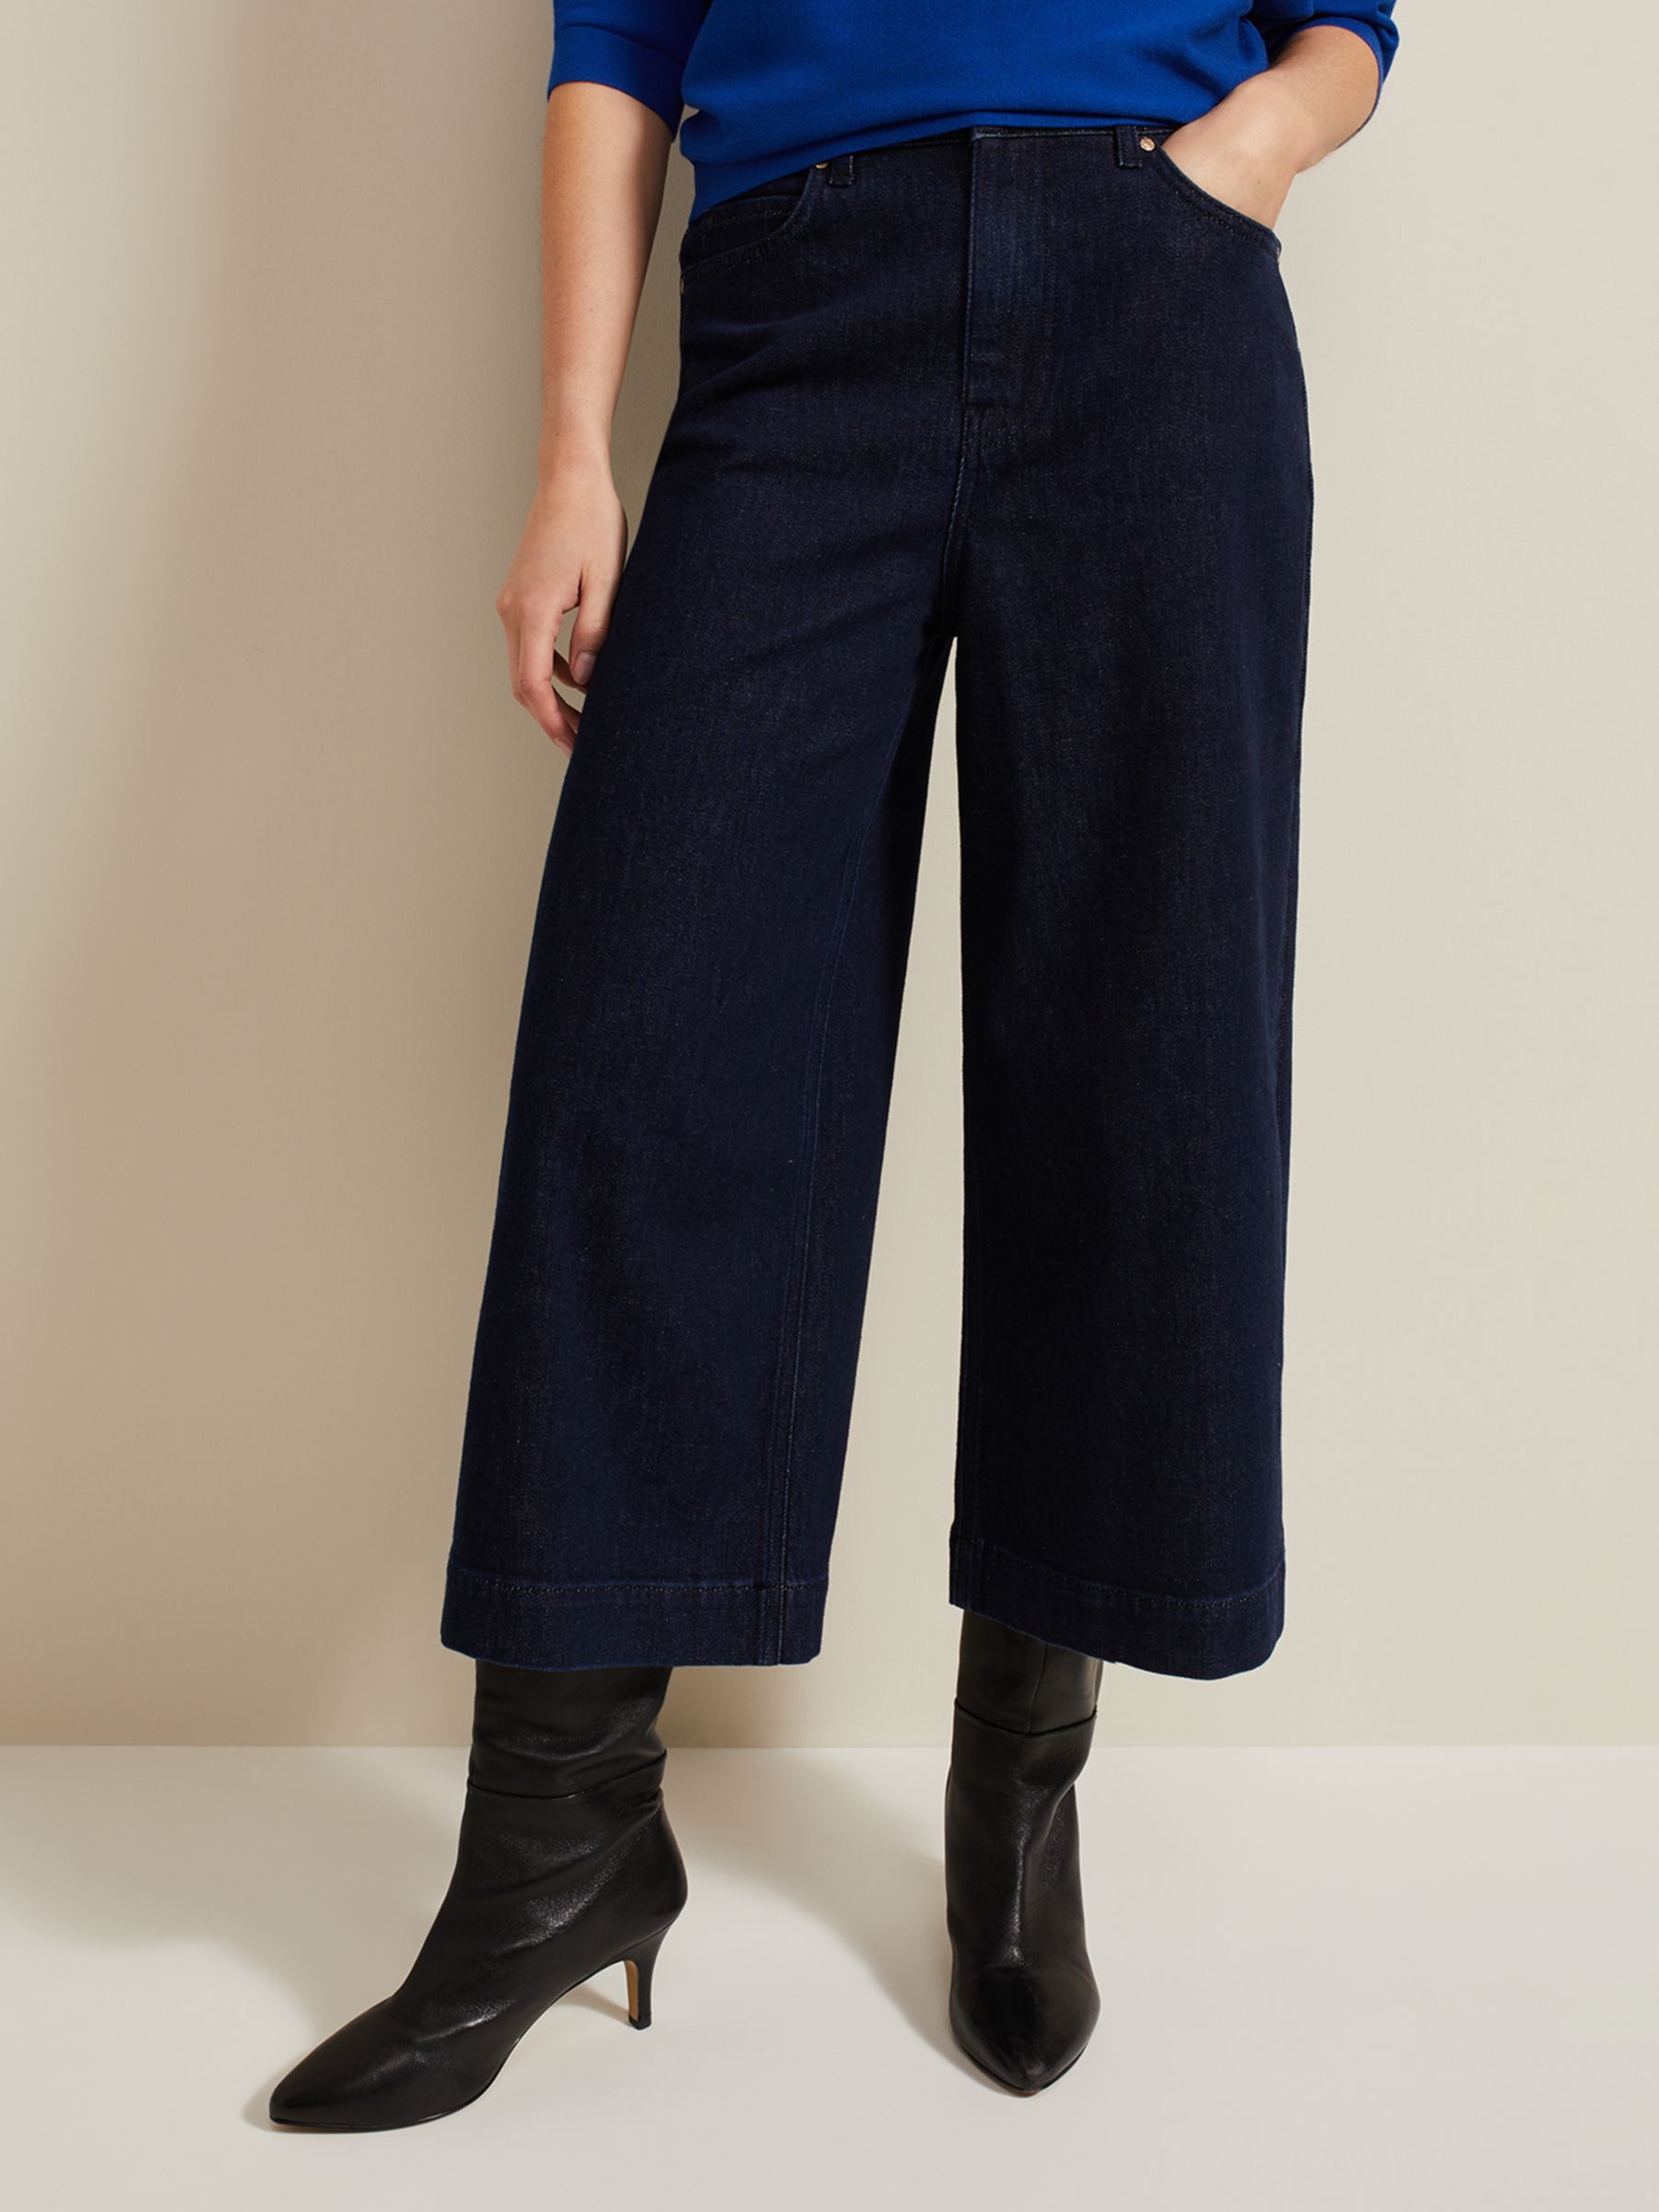 Phase Eight Ulrica Ankle Grazer Trousers, Black at John Lewis